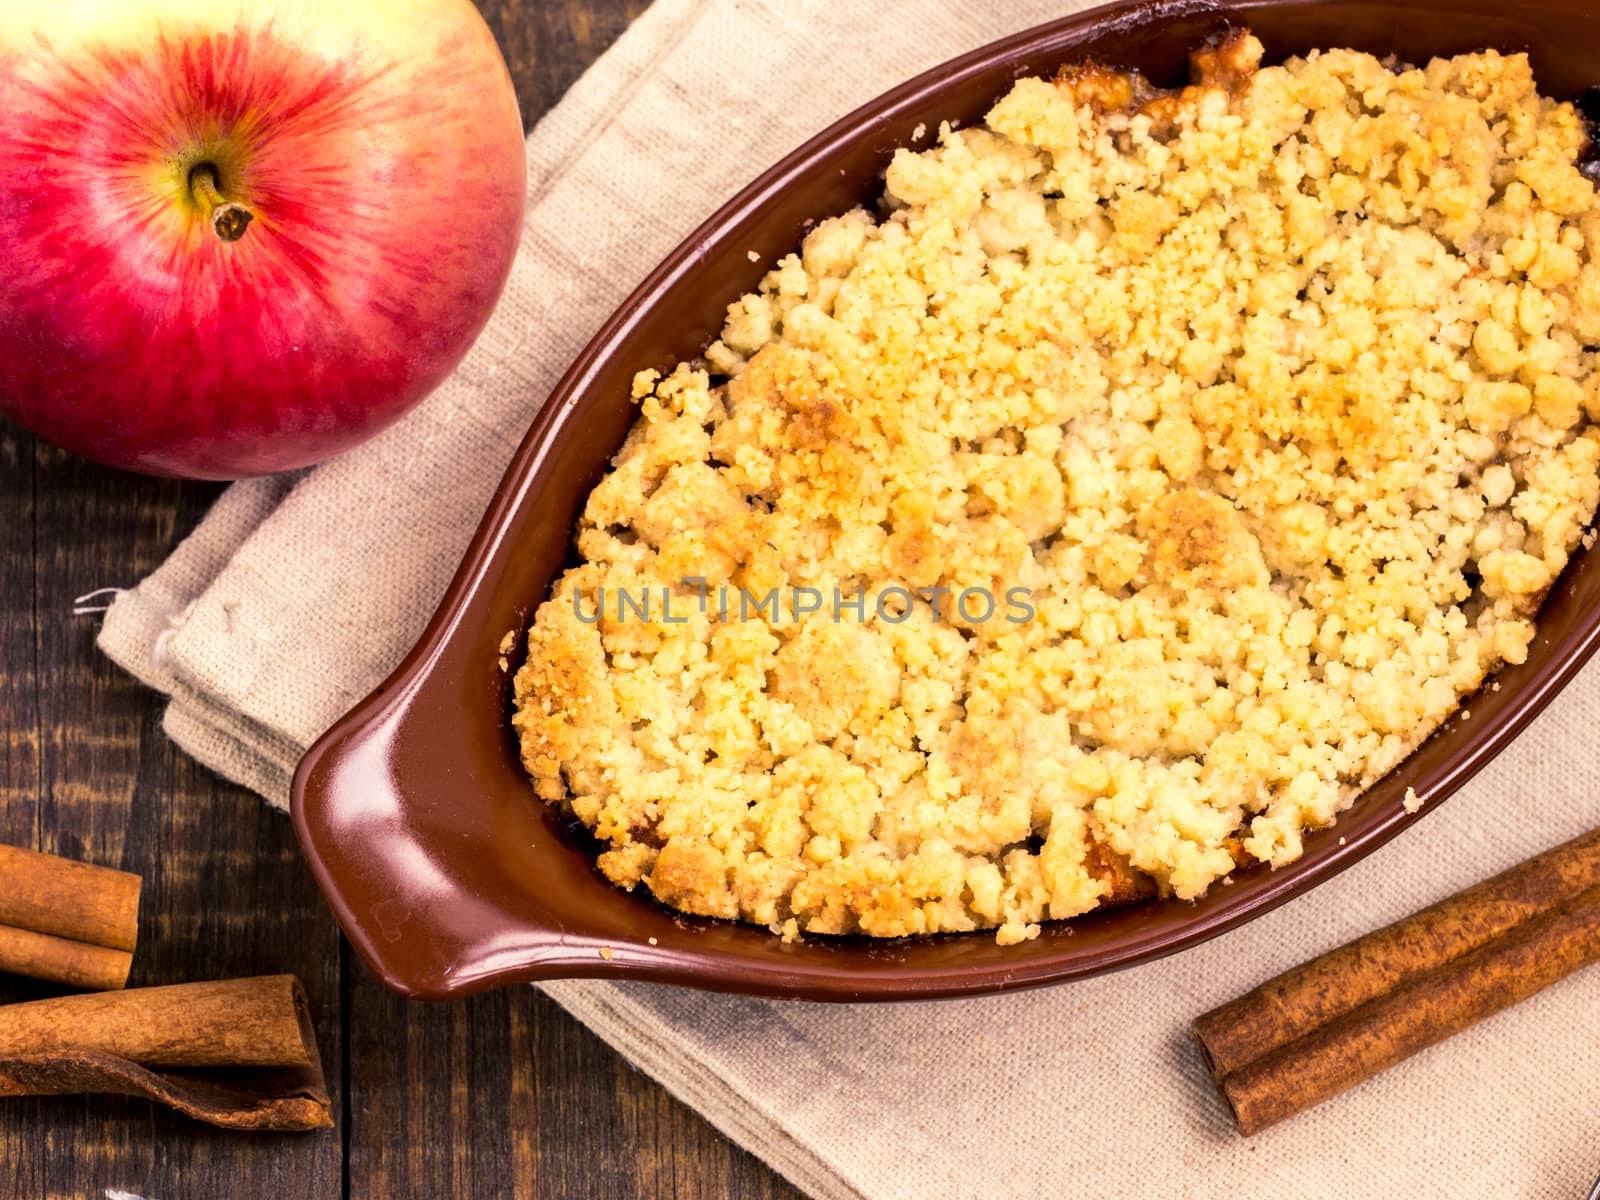 Homemade apple cramble cake with fresh apples and cinnamon sticks on rustic dark wooden background. Top view or flat lay